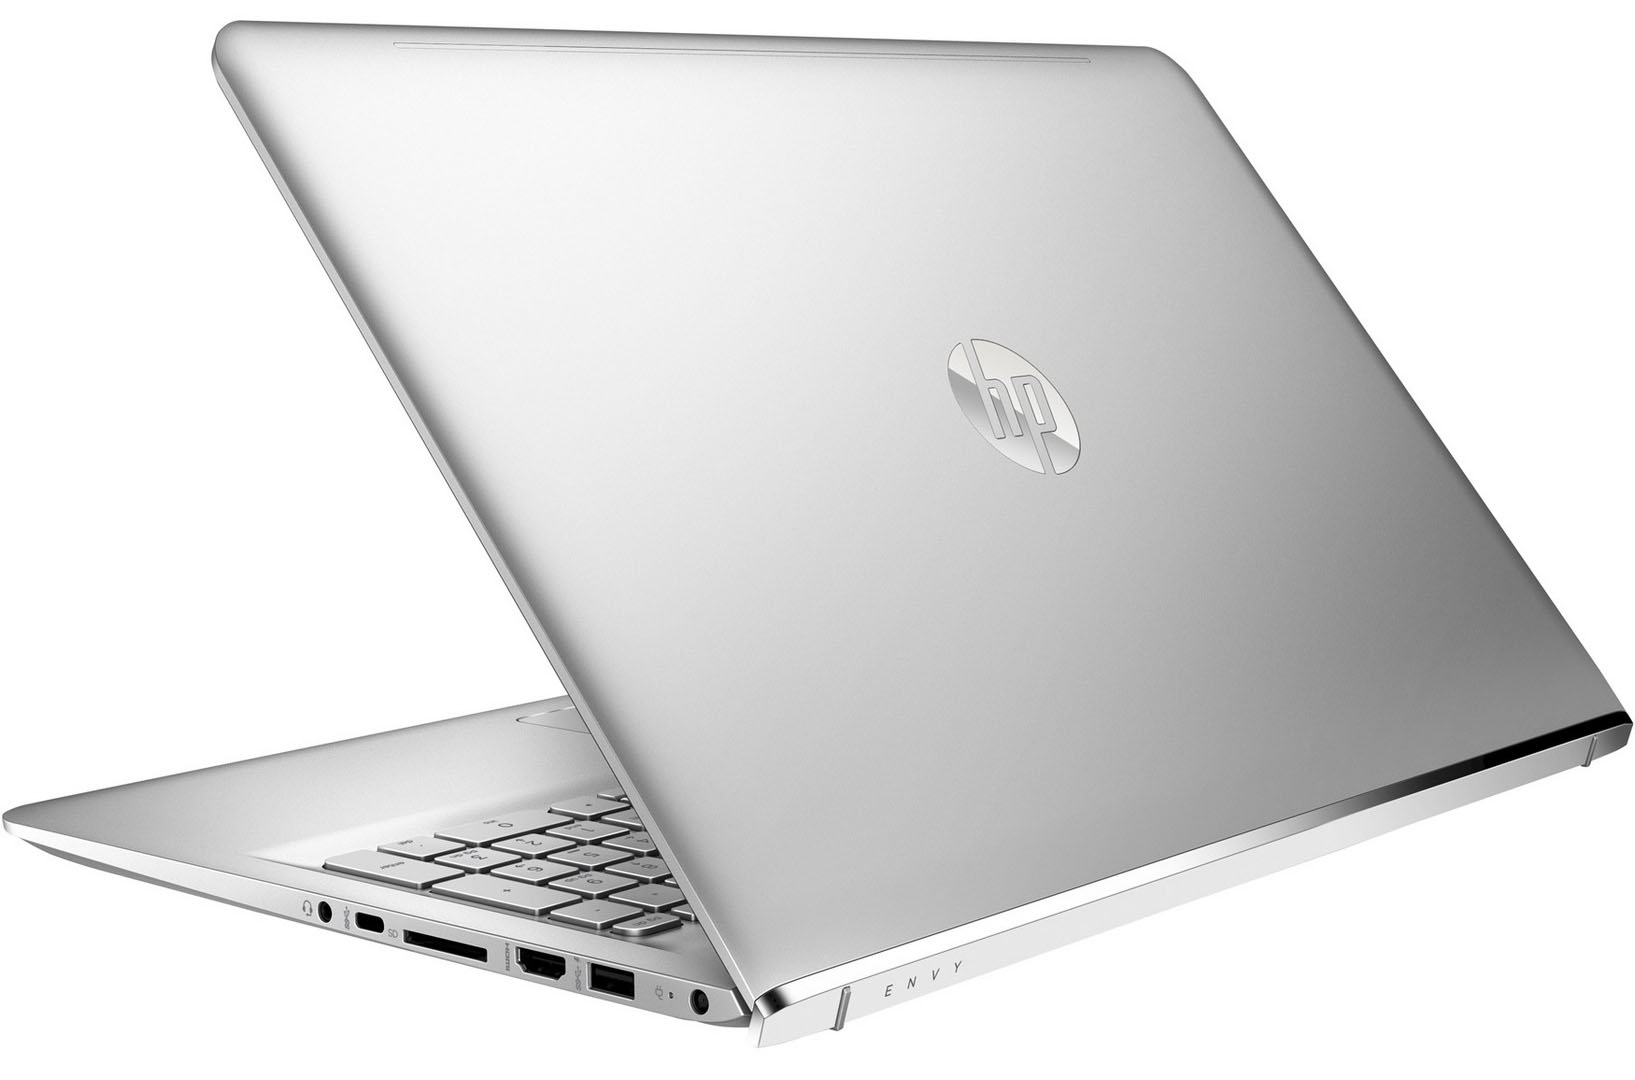 ENVY 15-as000 Notebook PC